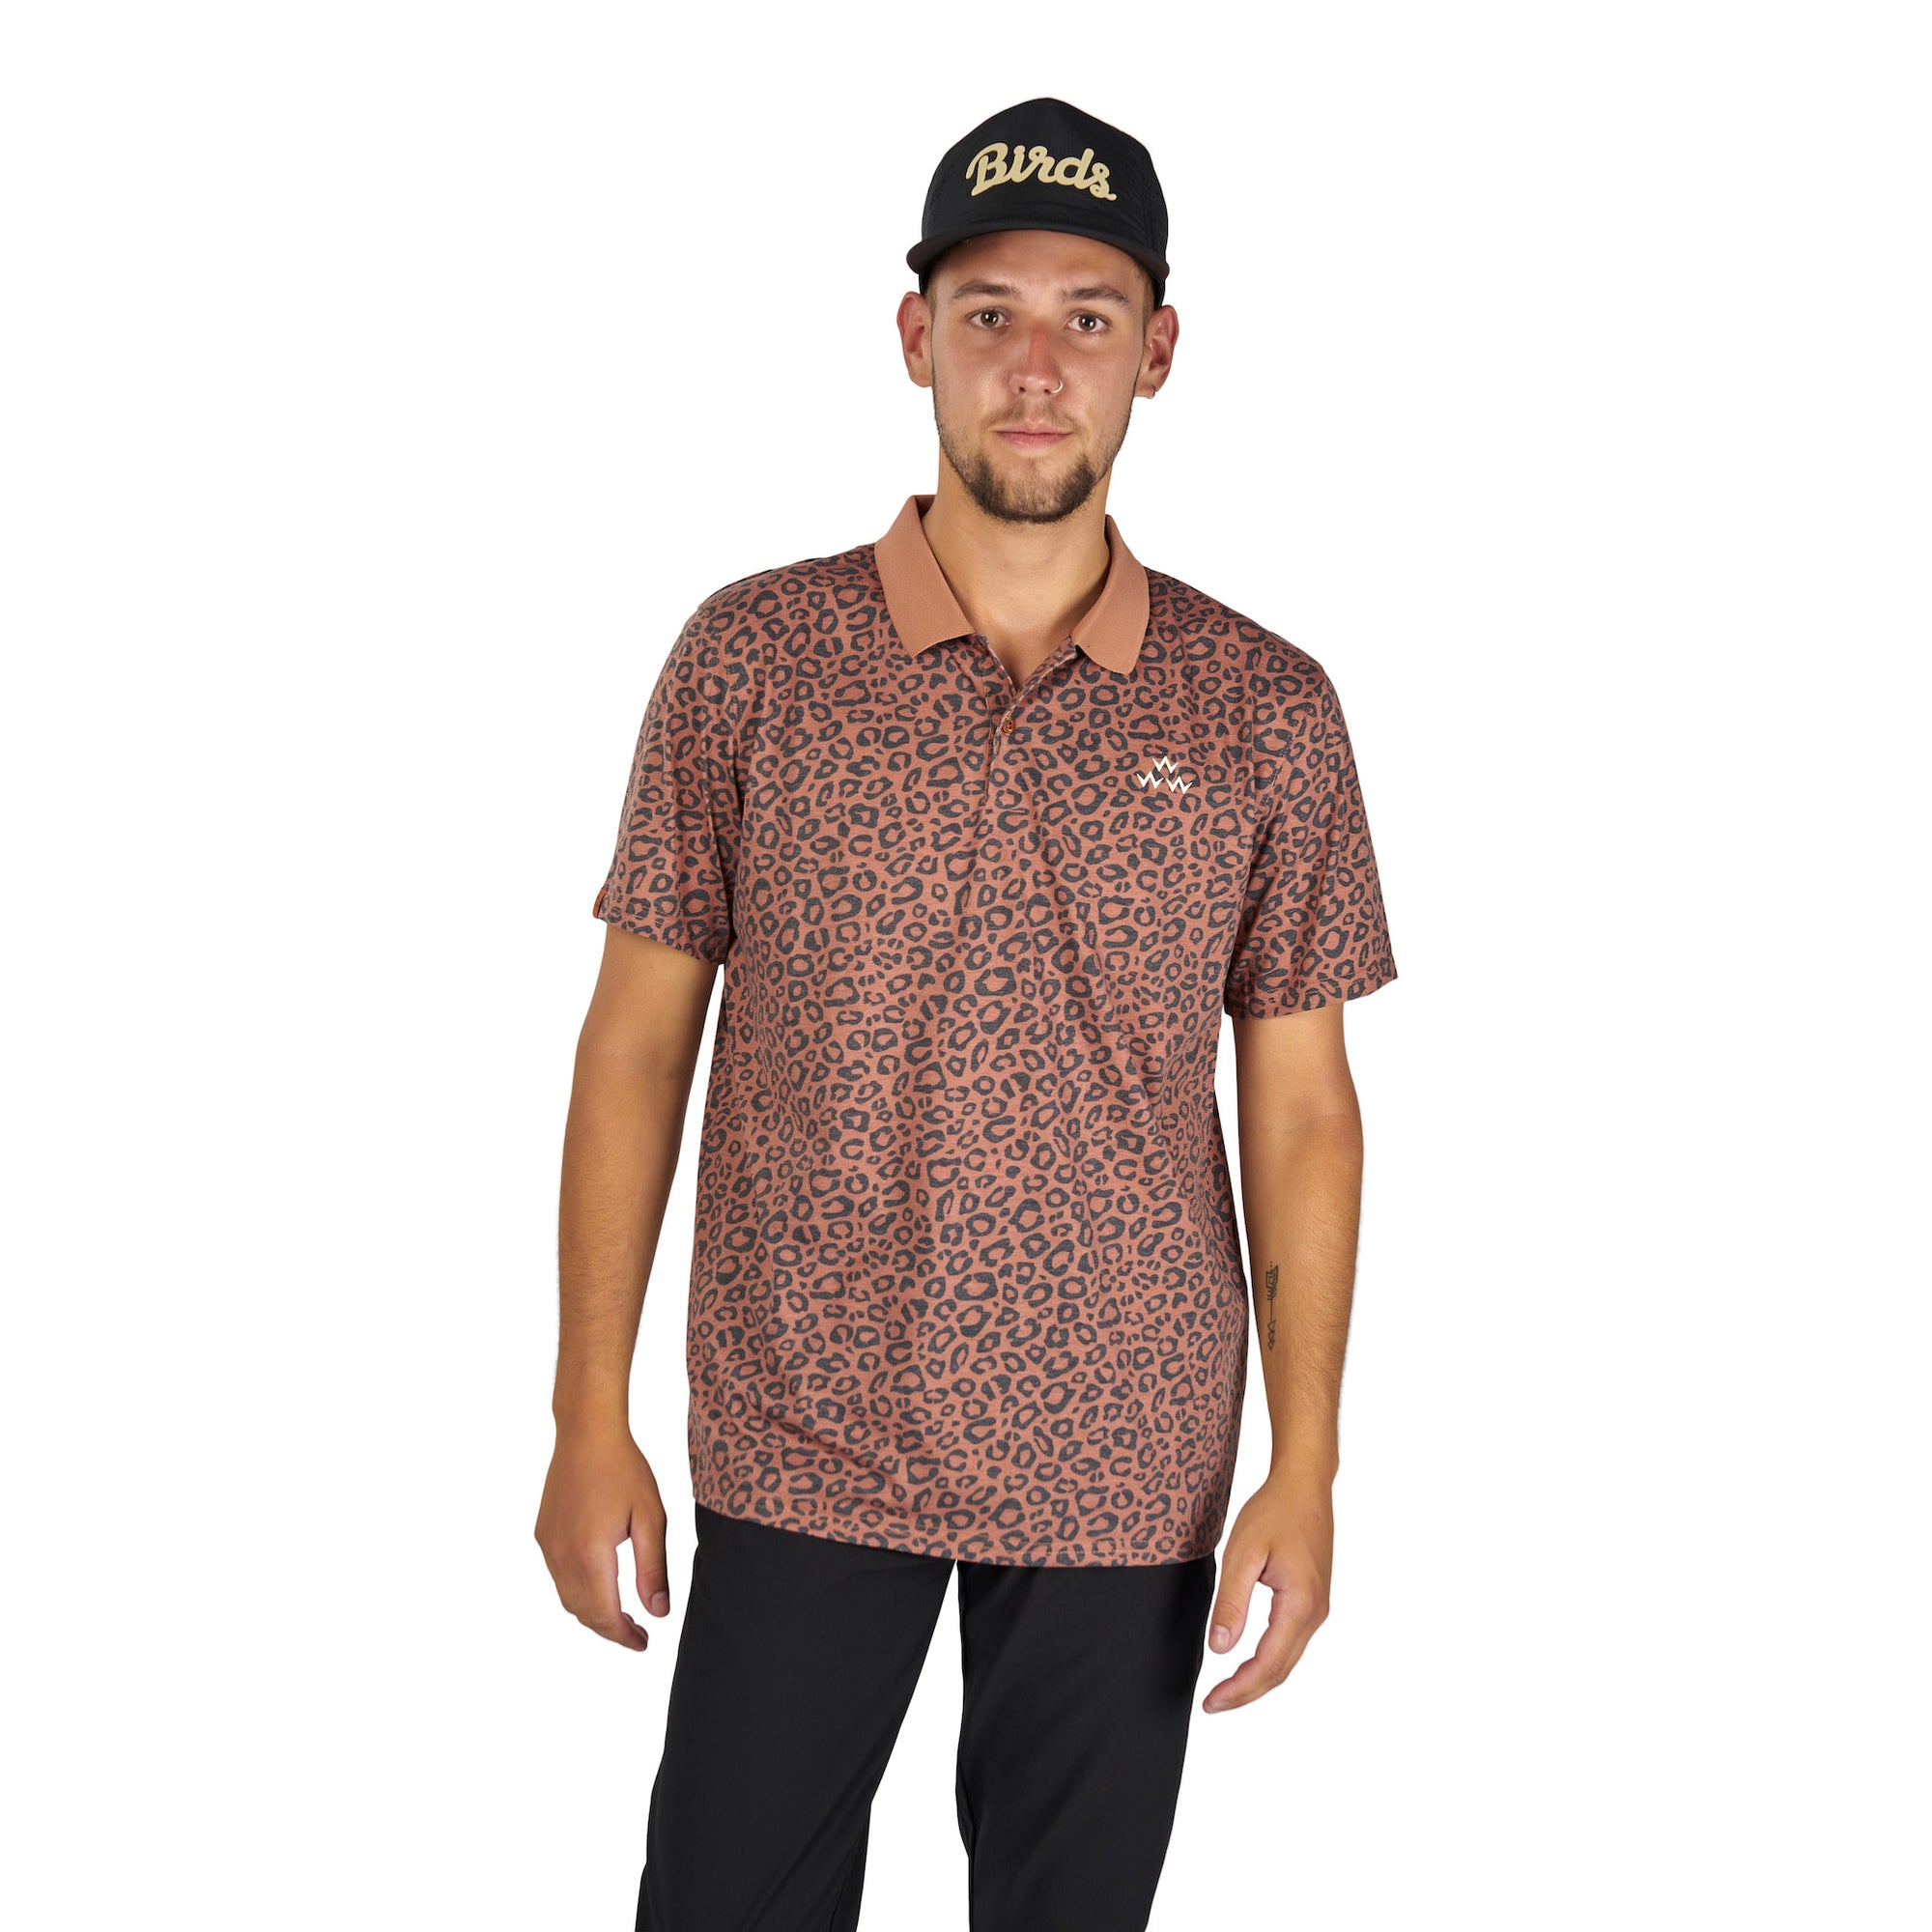 Possibly the best leopard print you've ever seen on possibly the best golf polo you've ever worn.  A match made in Byron, the Birds of Condor Leoputt polo is the perfect color and print for golfers who don't want to get lost in the rough.  Style for miles.